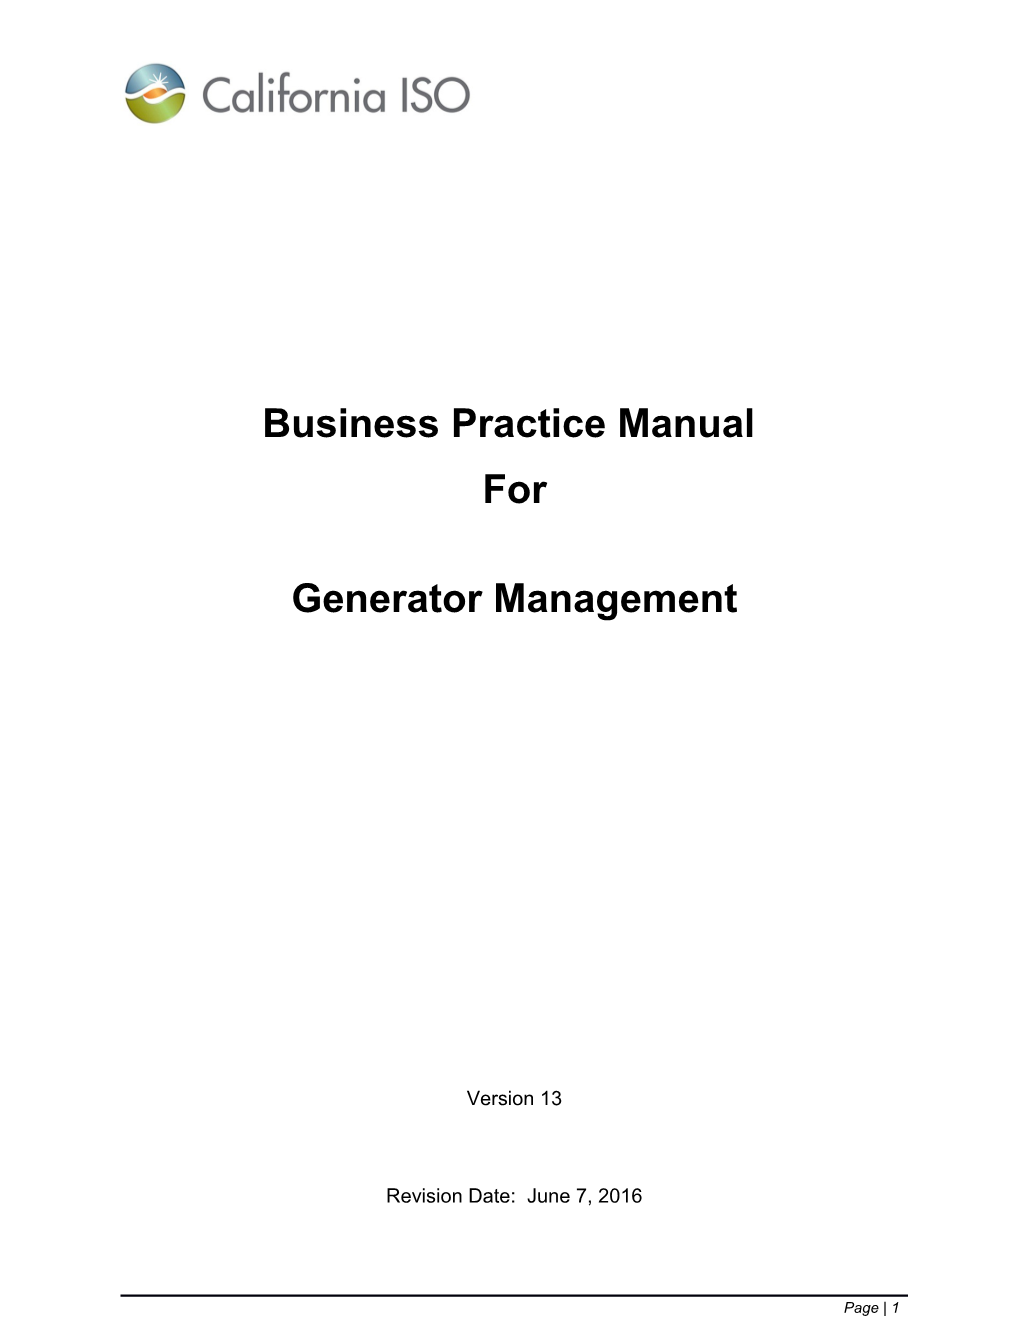 CAISO Business Practice Manual BPM for Generator Management